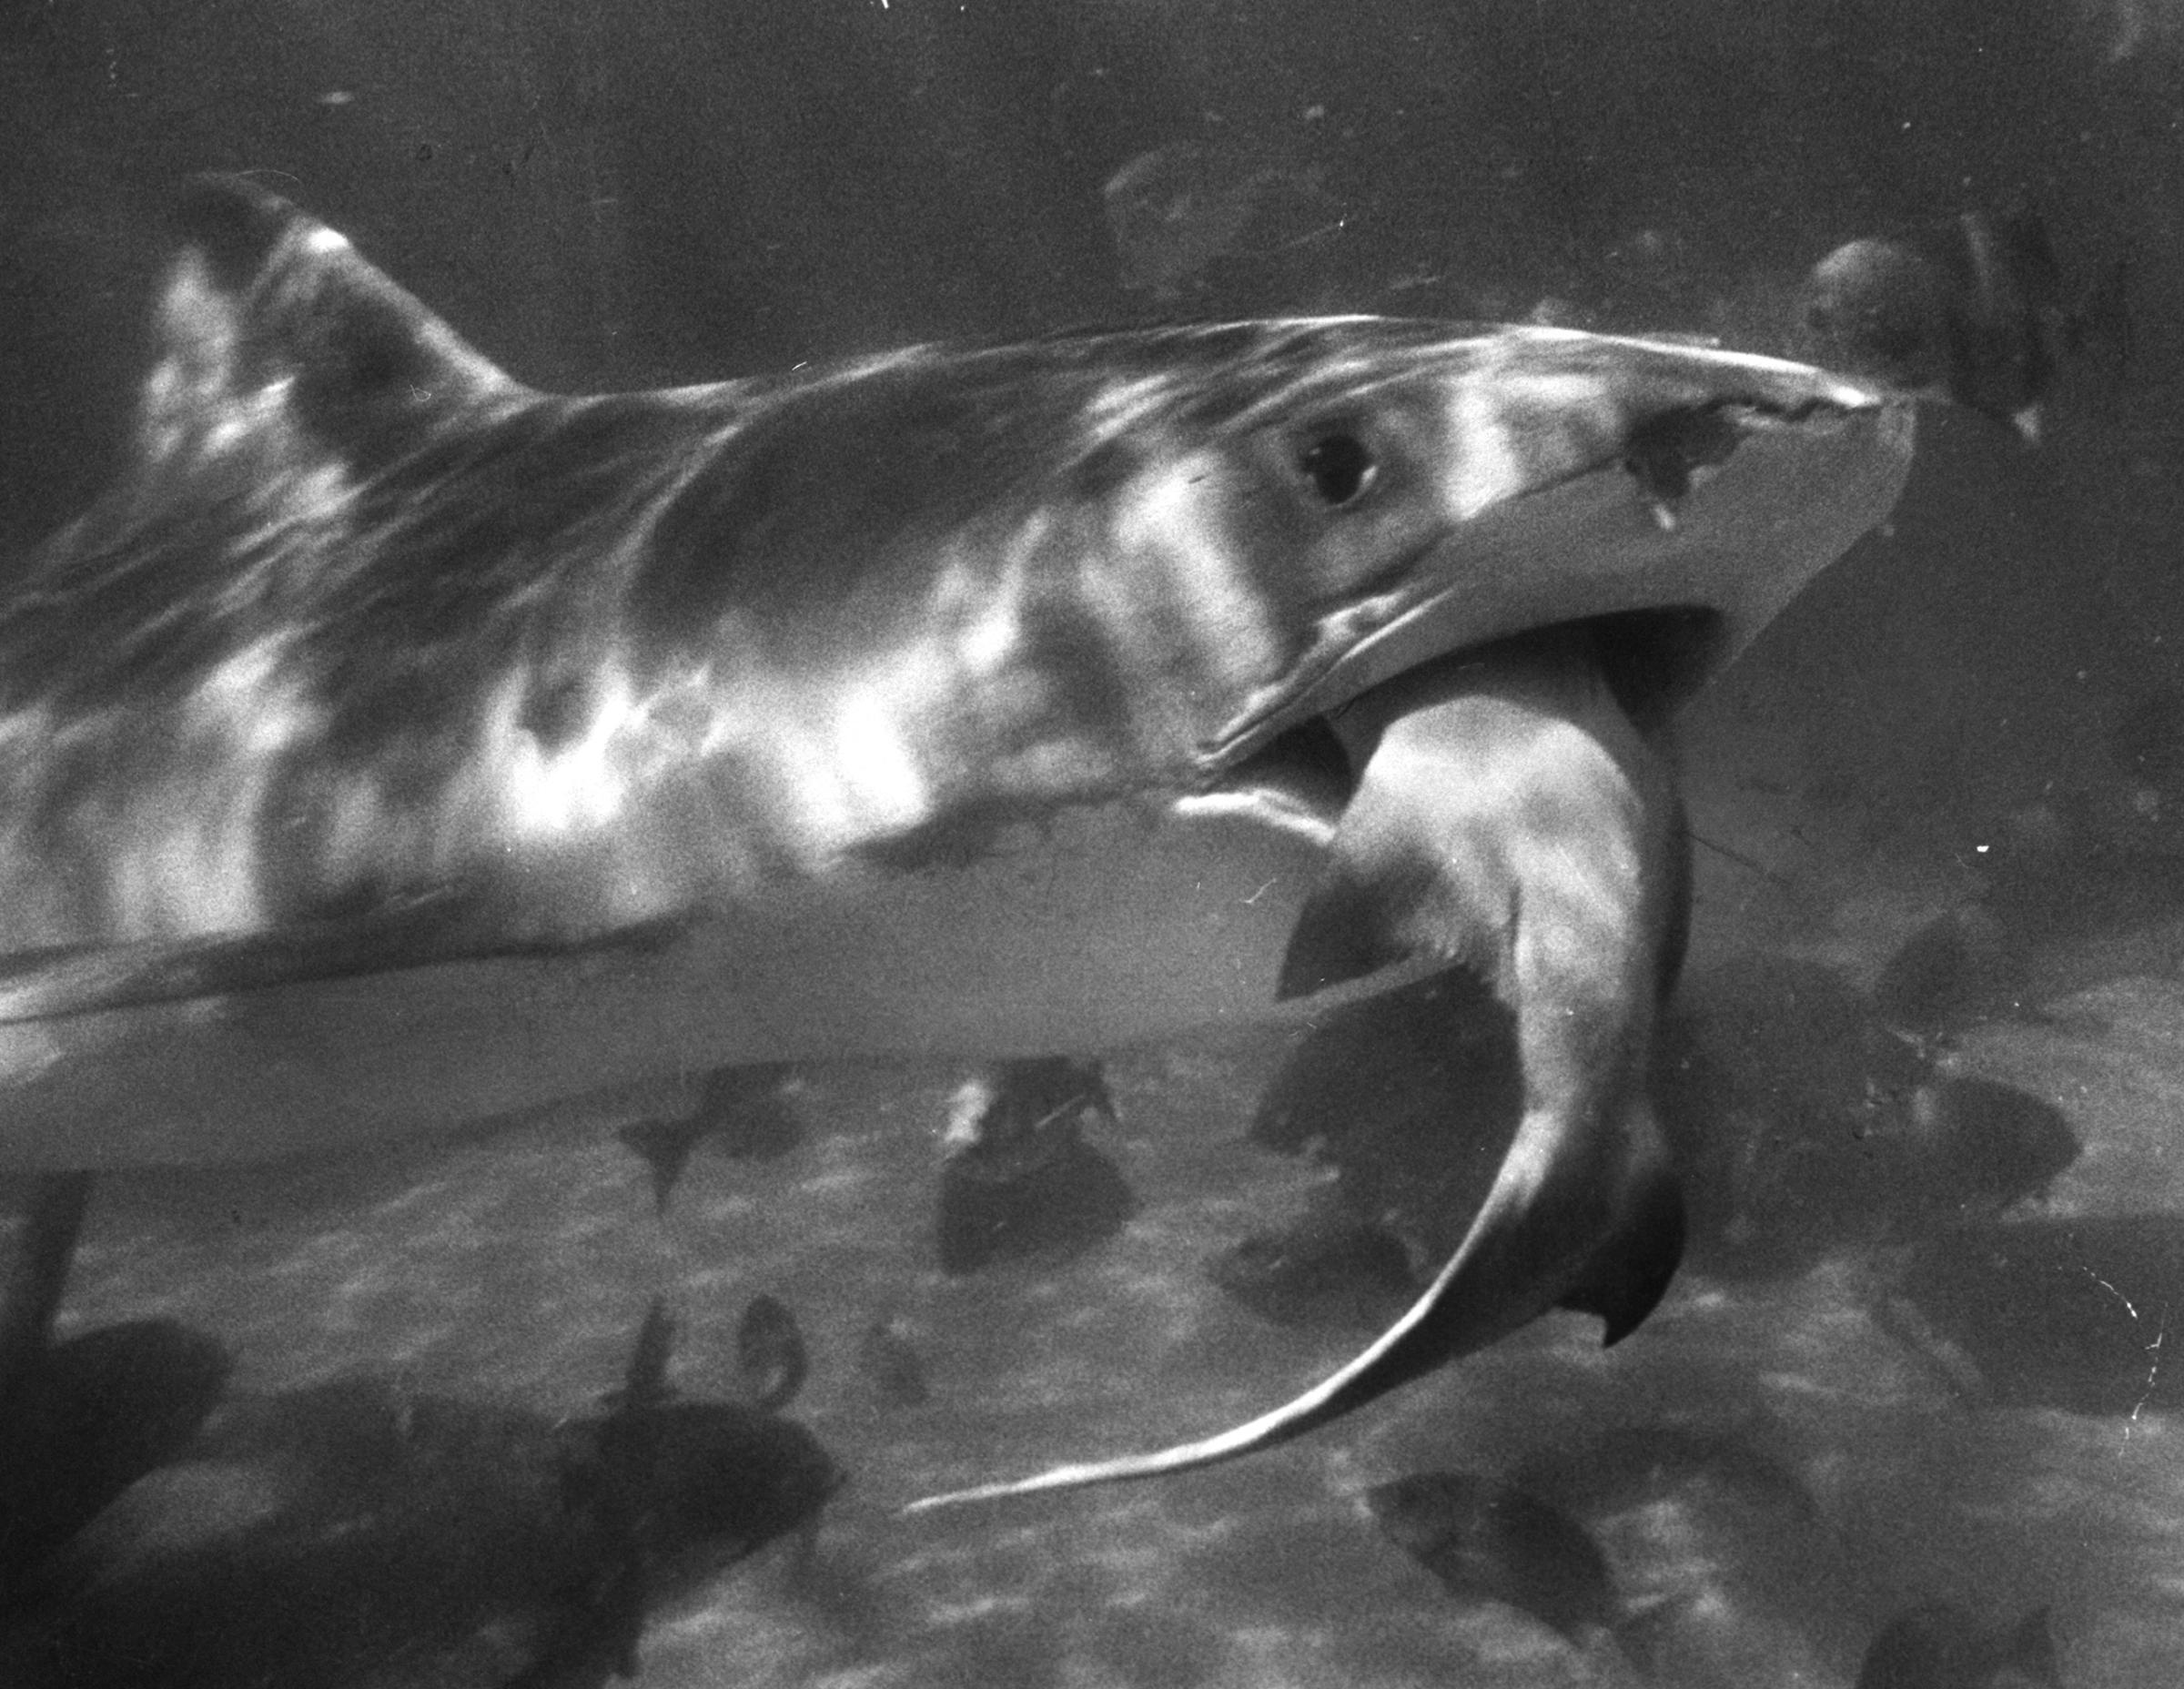 Tiger shark, difficult to keep in captivity, devours lemon shark at Florida's Marineland. Untempted by other foods, this tiger would have starved without lemon shark. But when free, tigers are undiscriminating scavengers, scouring the sea bottoms near shore and swallowing anything from turtle shells to tin cans.